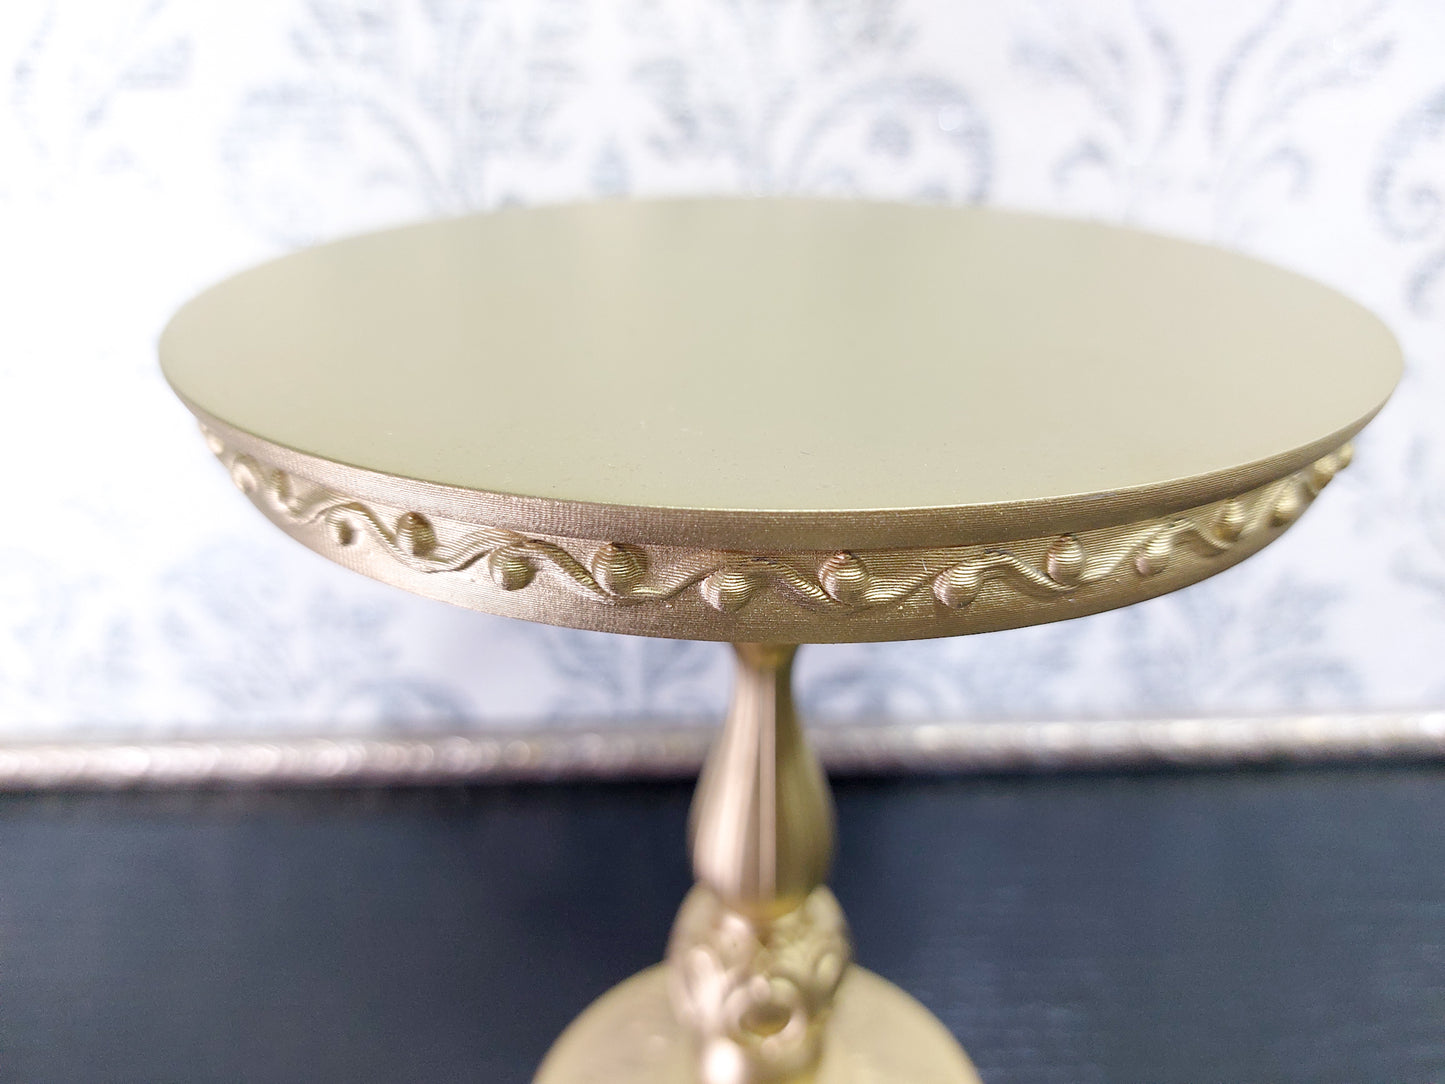 Baroque round table for dolls, gold